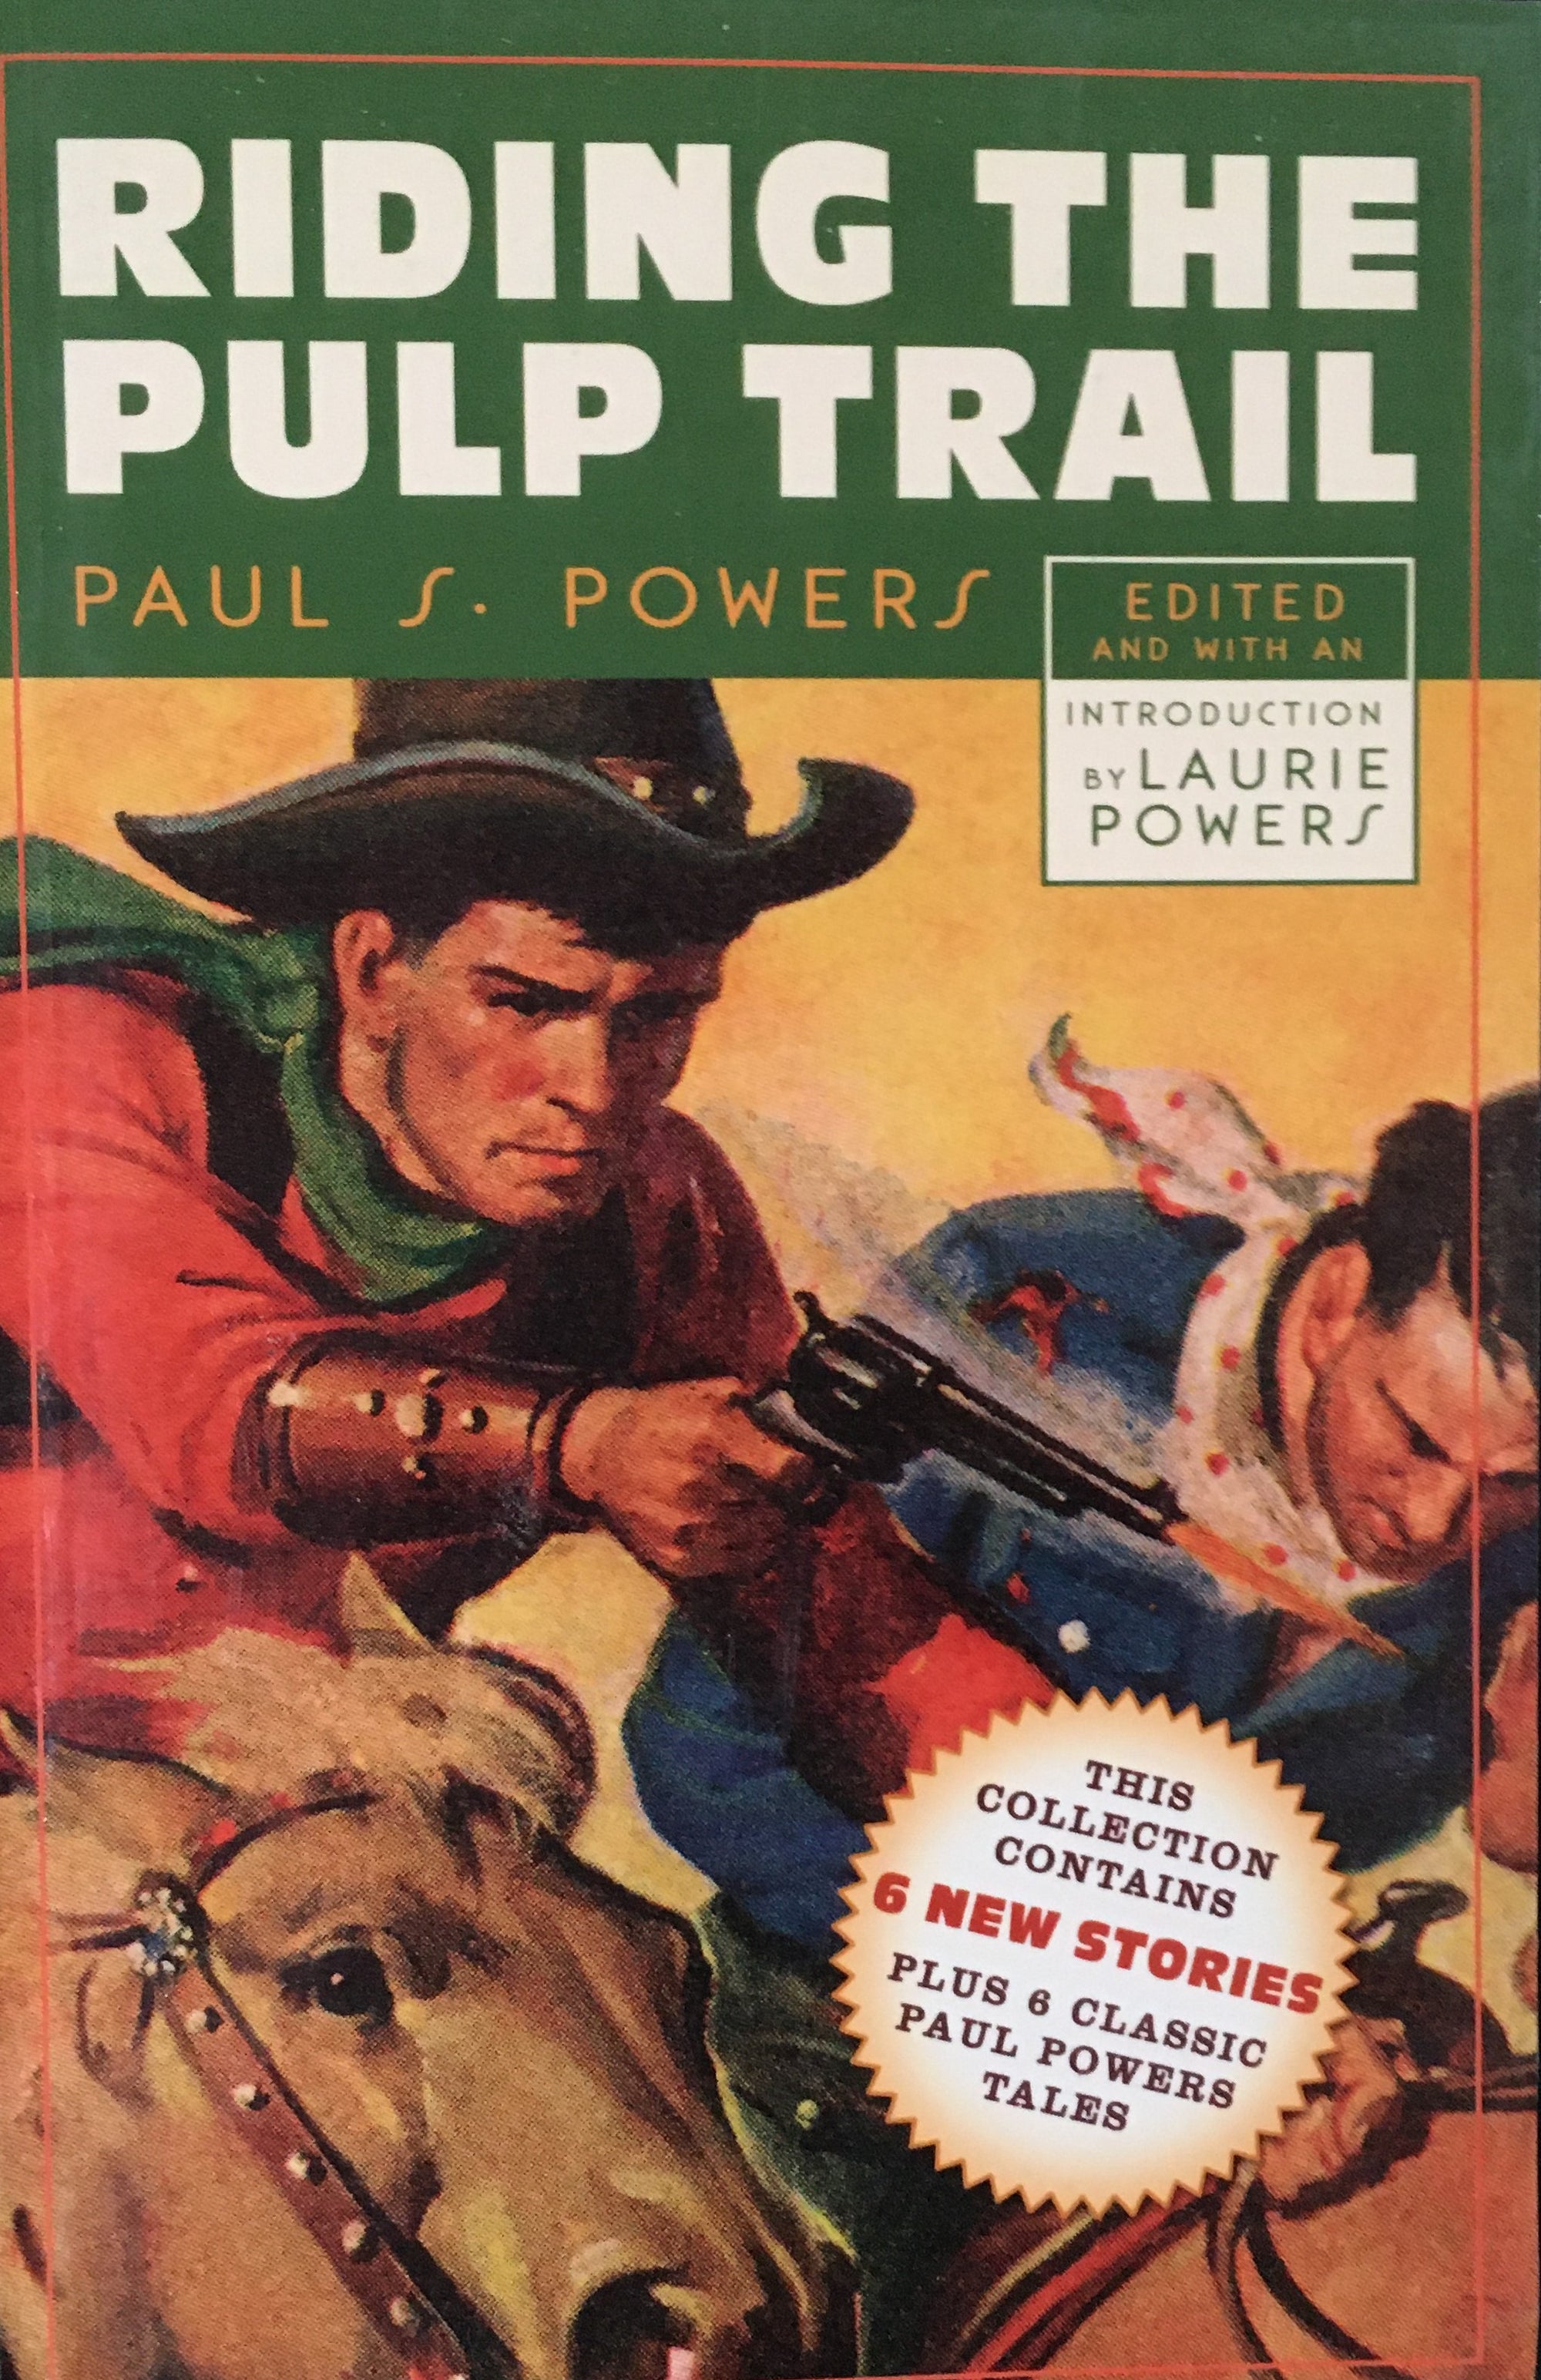 Riding The Pulp Trail by Paul S. Powers Book Cover